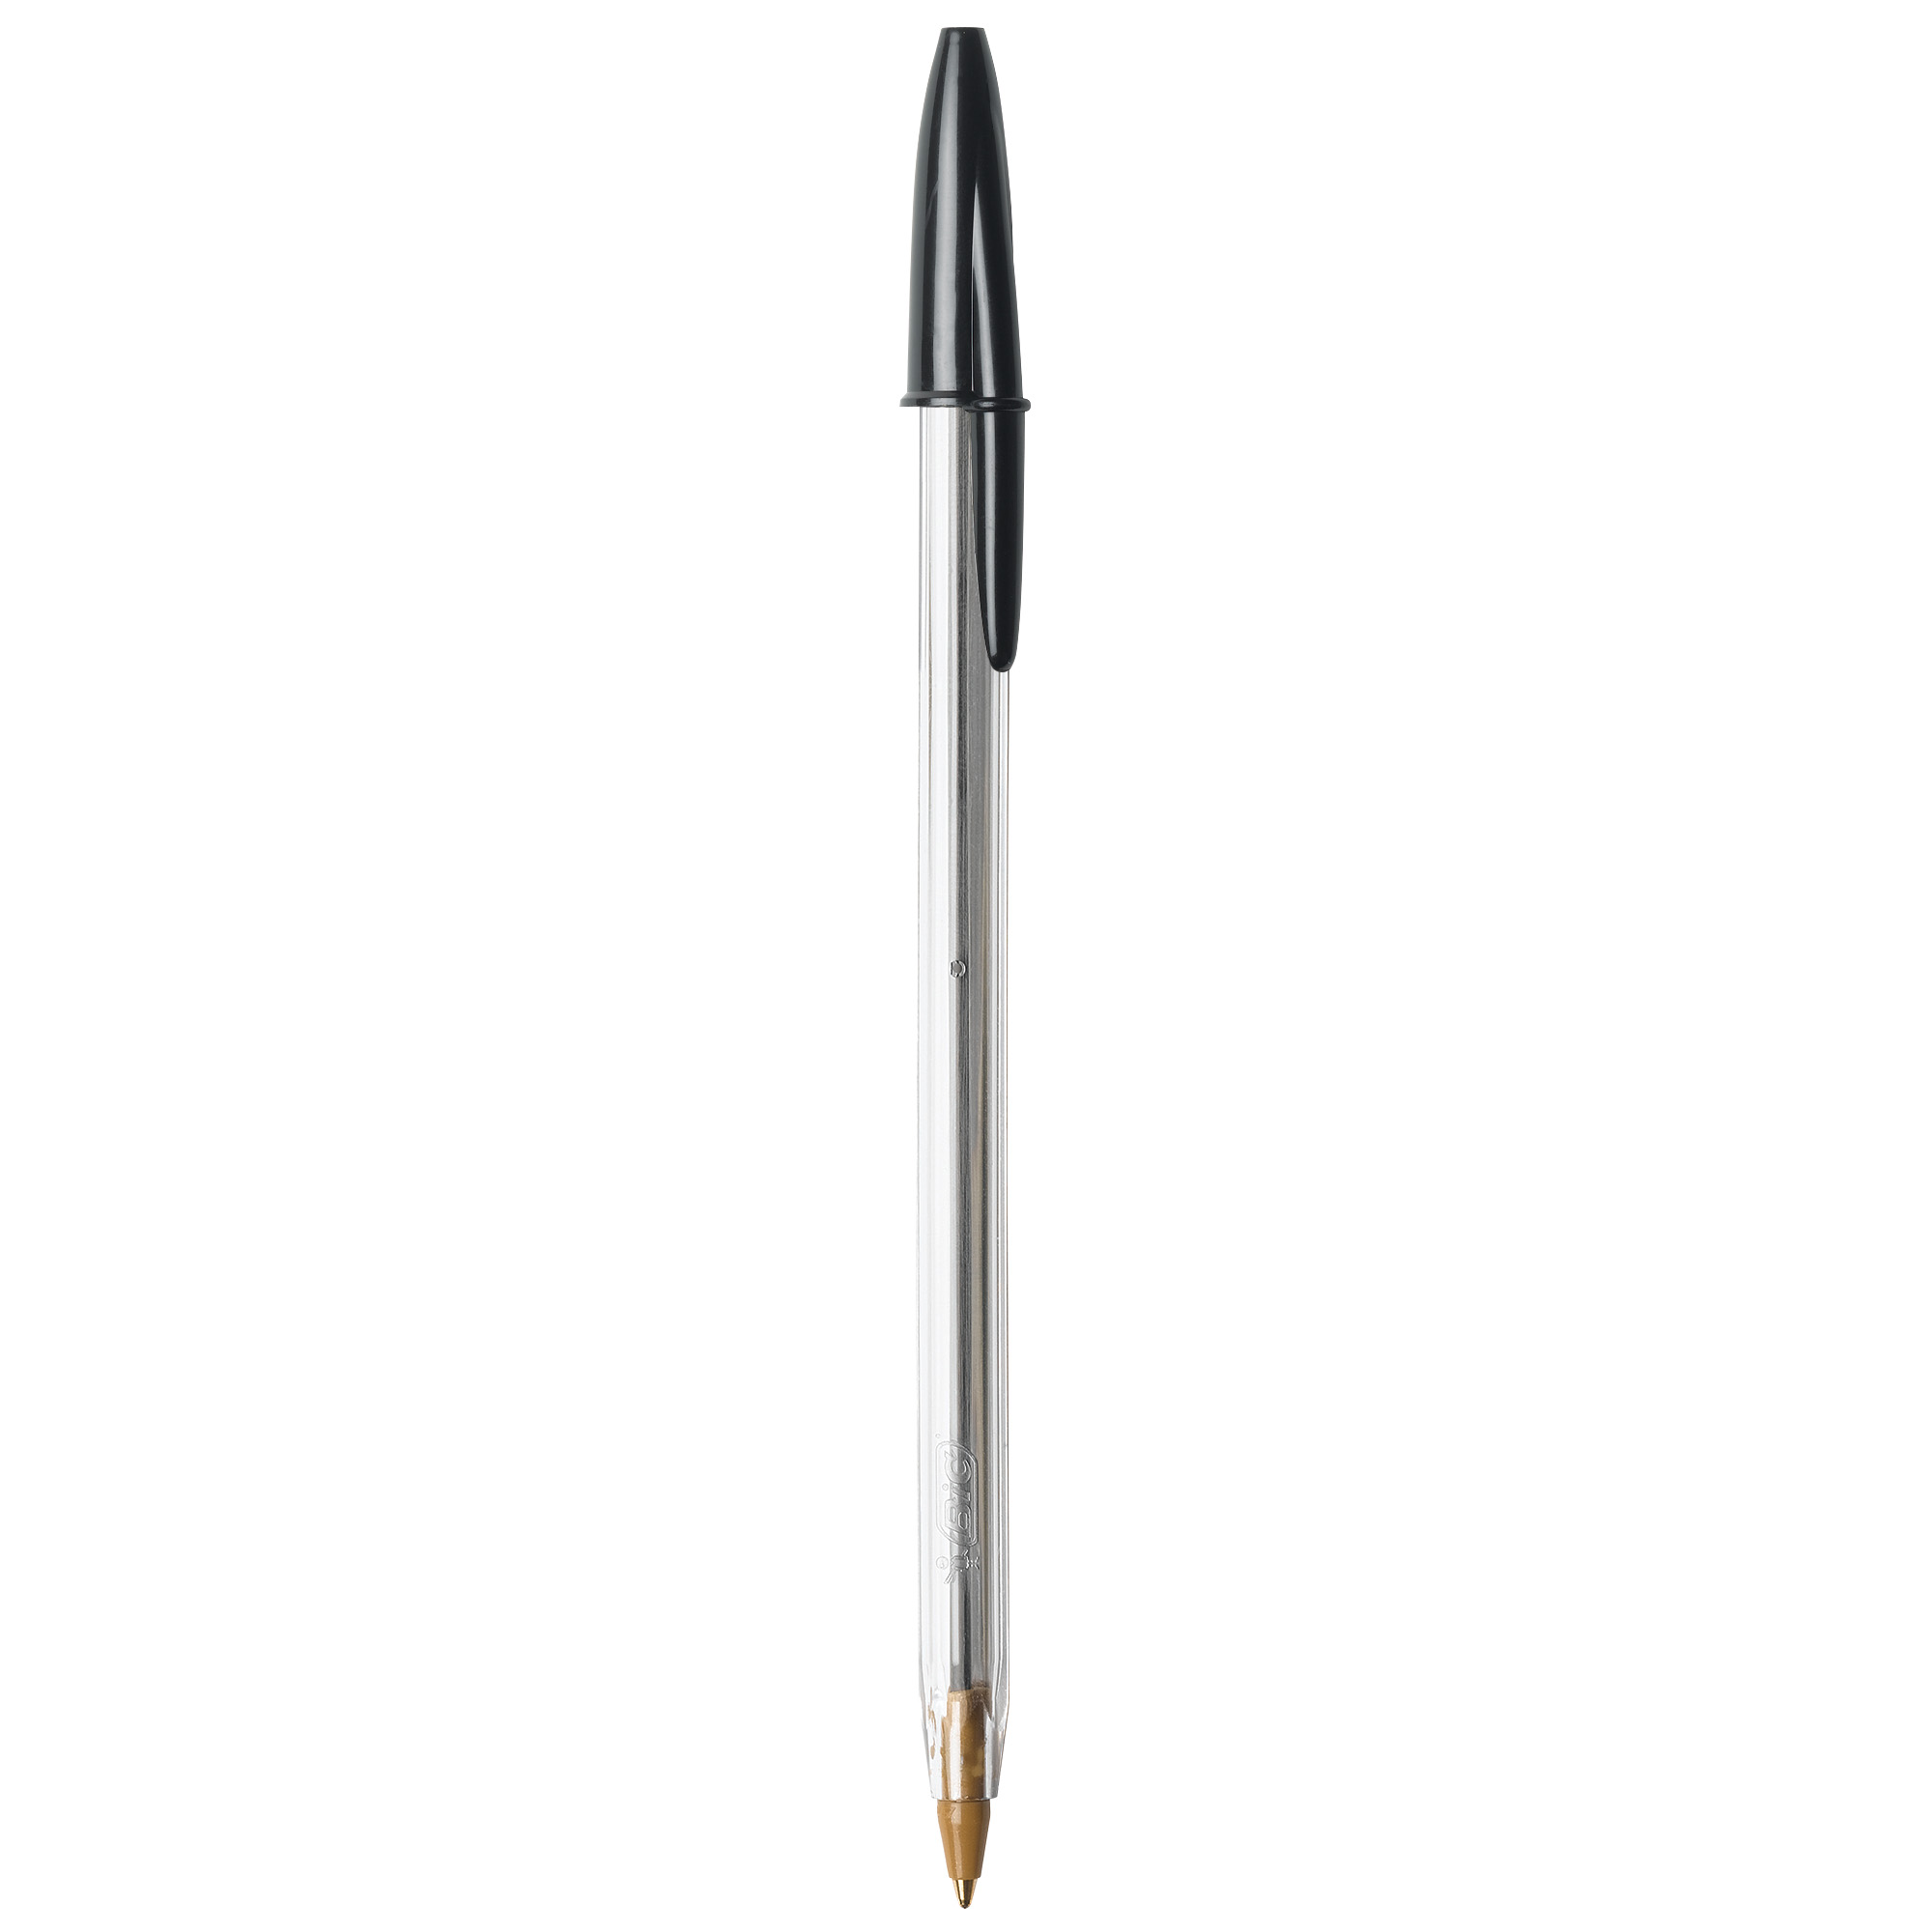 BIC Cristal Xtra Smooth Ballpoint Stick Pens, 1.0 mm, Black Ink, Pack of 10 - image 5 of 7